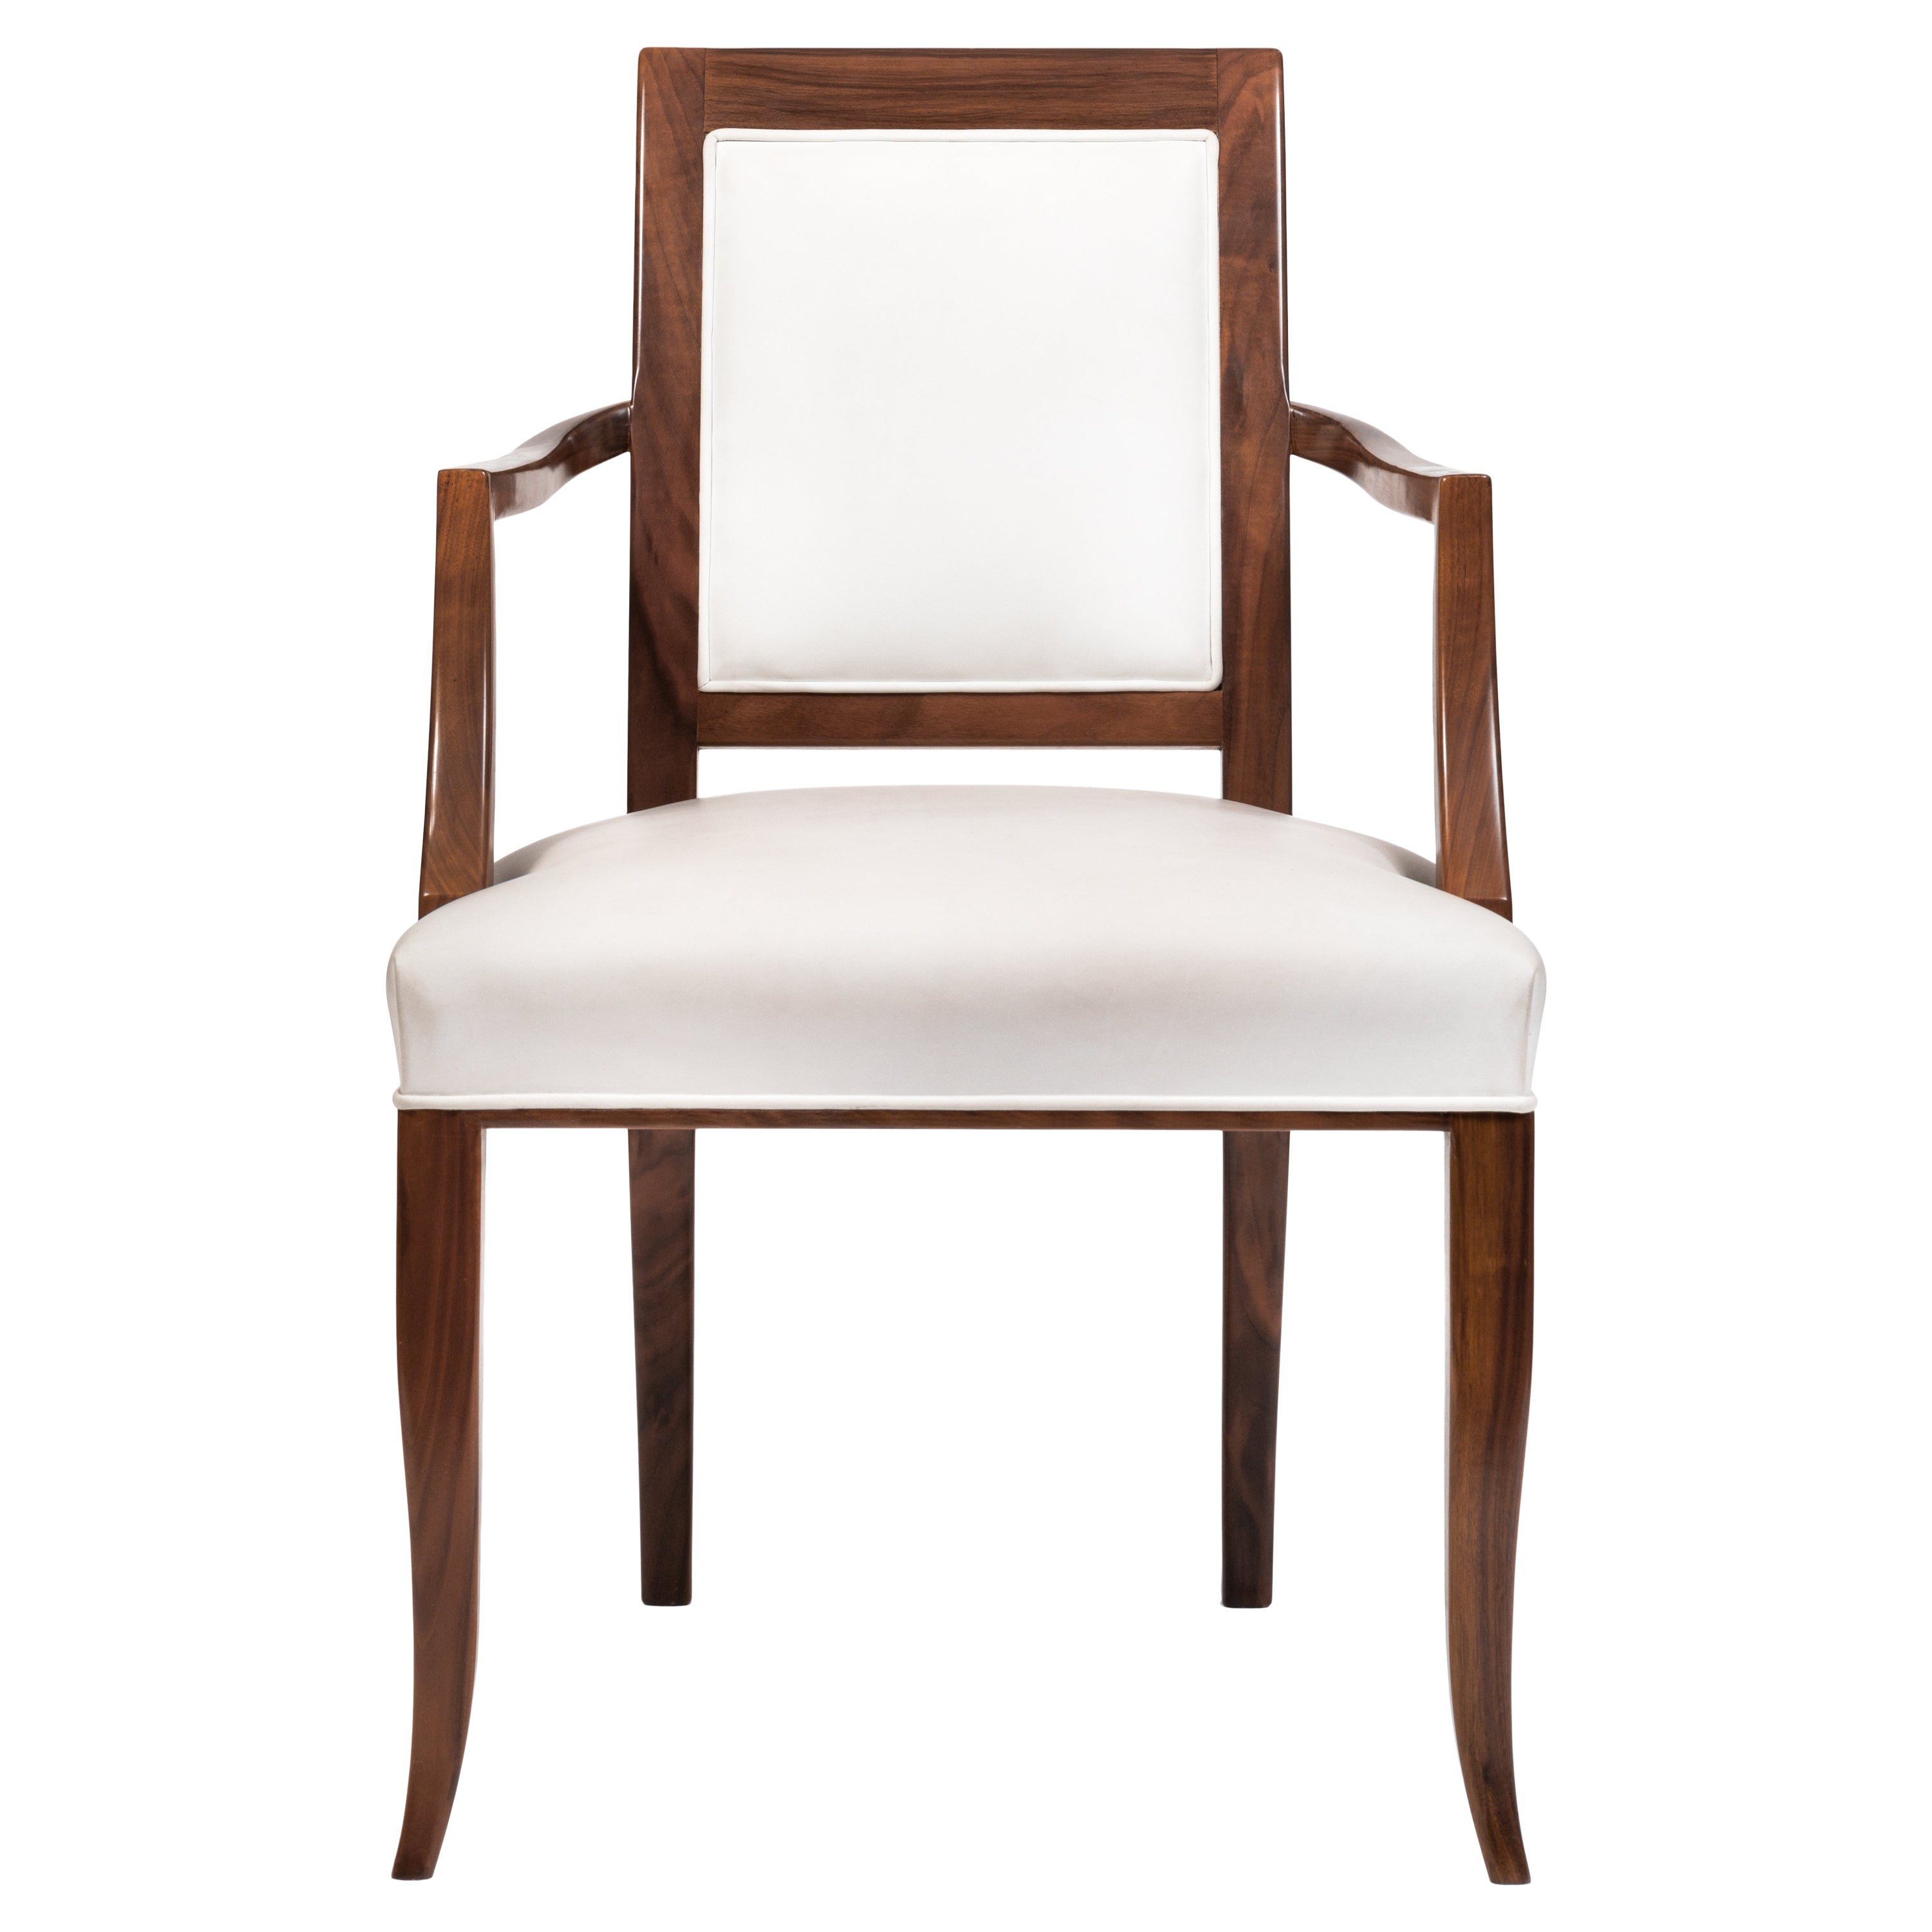 Contemporary Style Walnut Chair with Armrests, Made in Italy